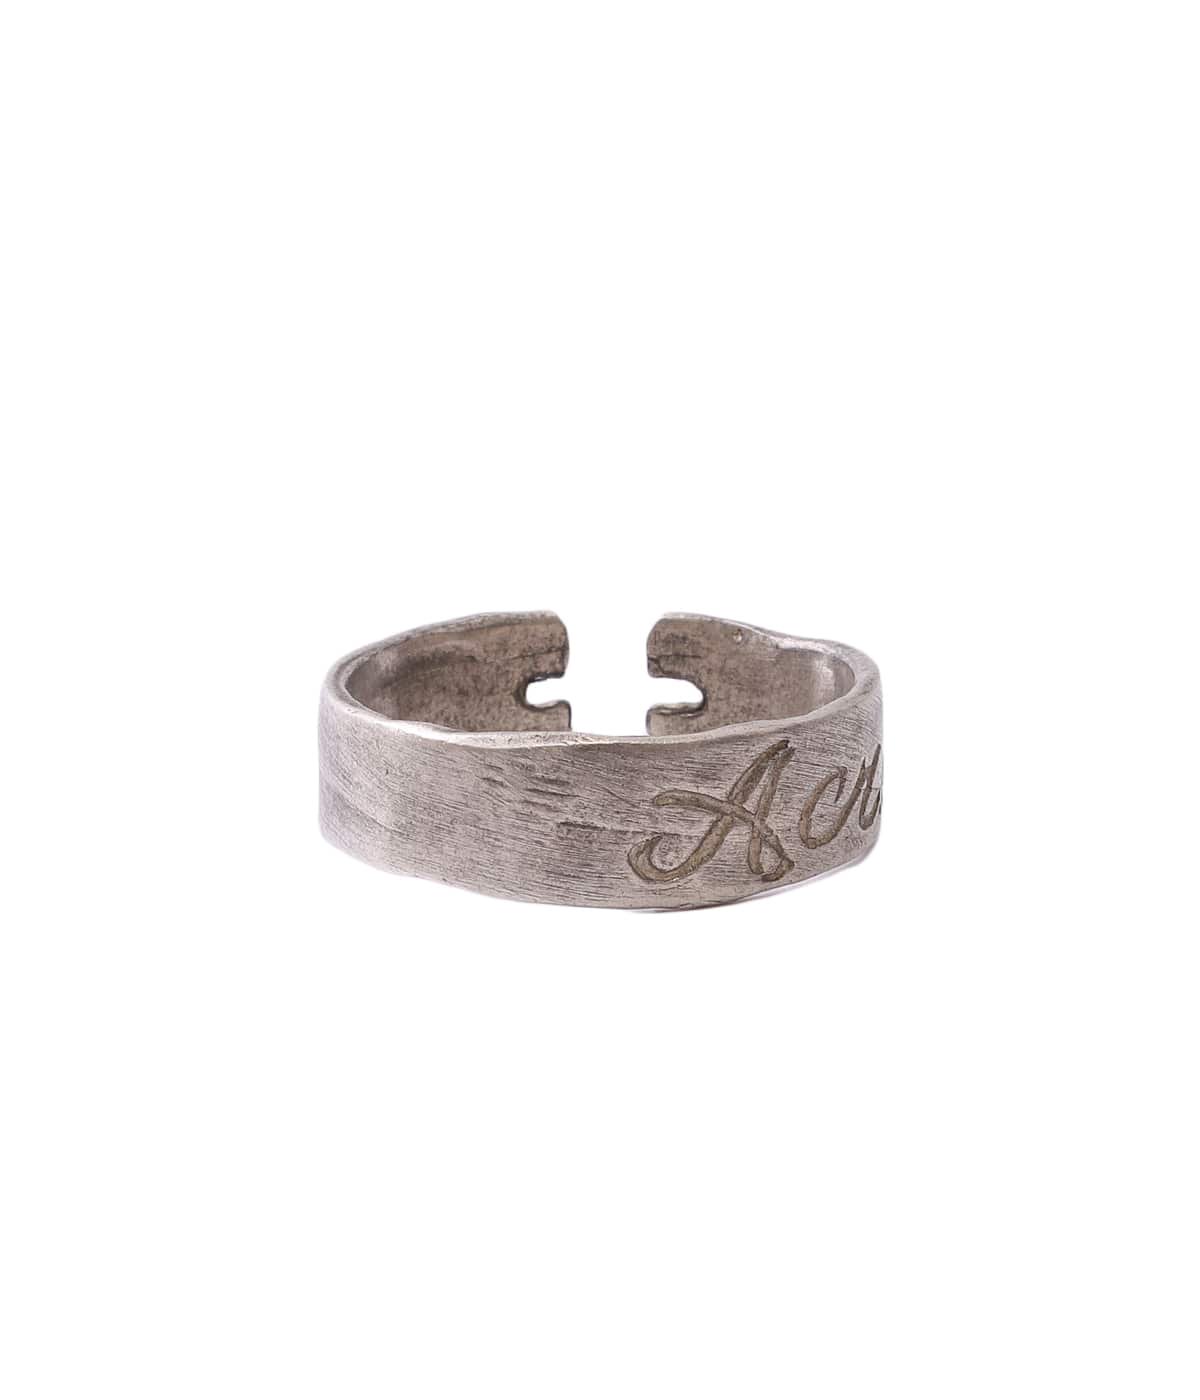 carved "across" ring